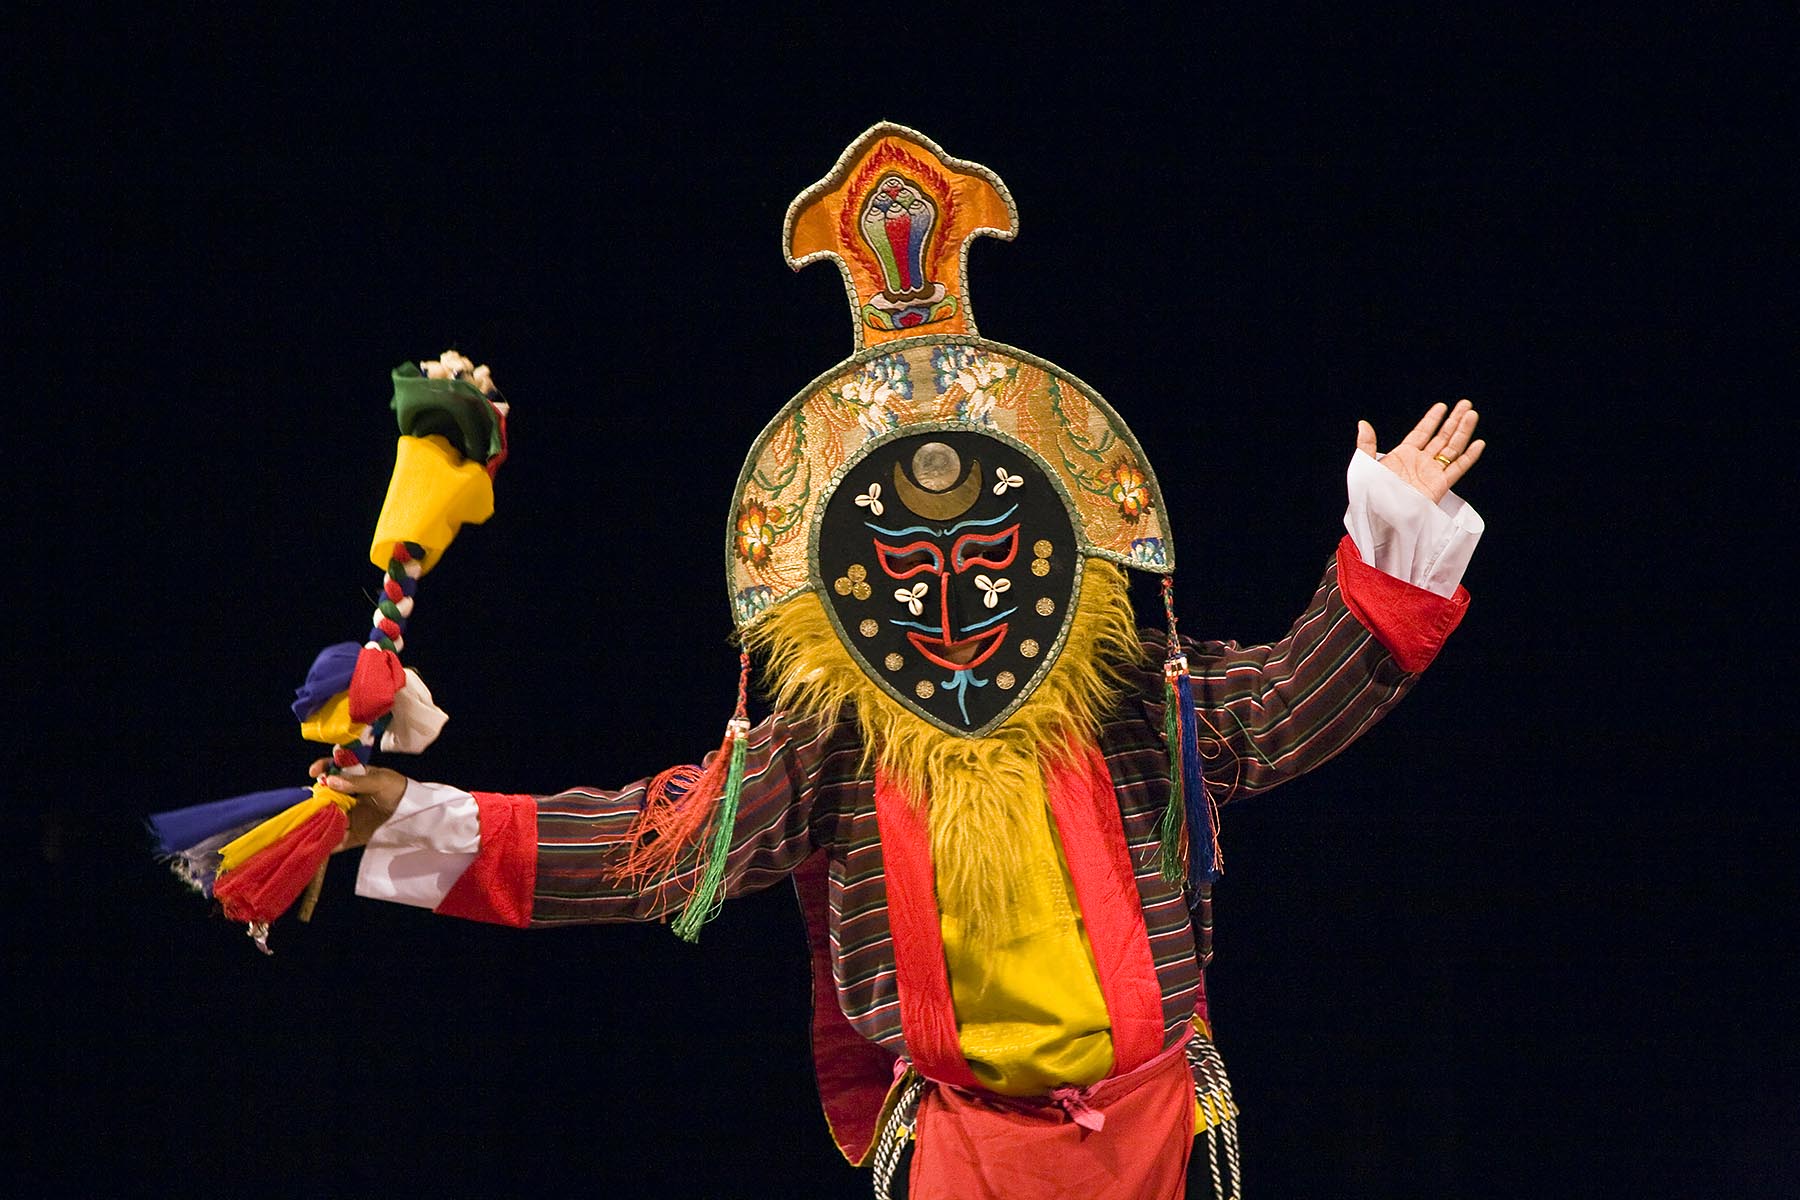 MASKED CHAM DANCER during TIBET NIGHT at a DALAI LAMA teaching in October 2007 sponsored by KUMBUM CHAMTSE LING and the TIBETAN CULTURAL CENTER - BLOOMINGTON, INDIANA